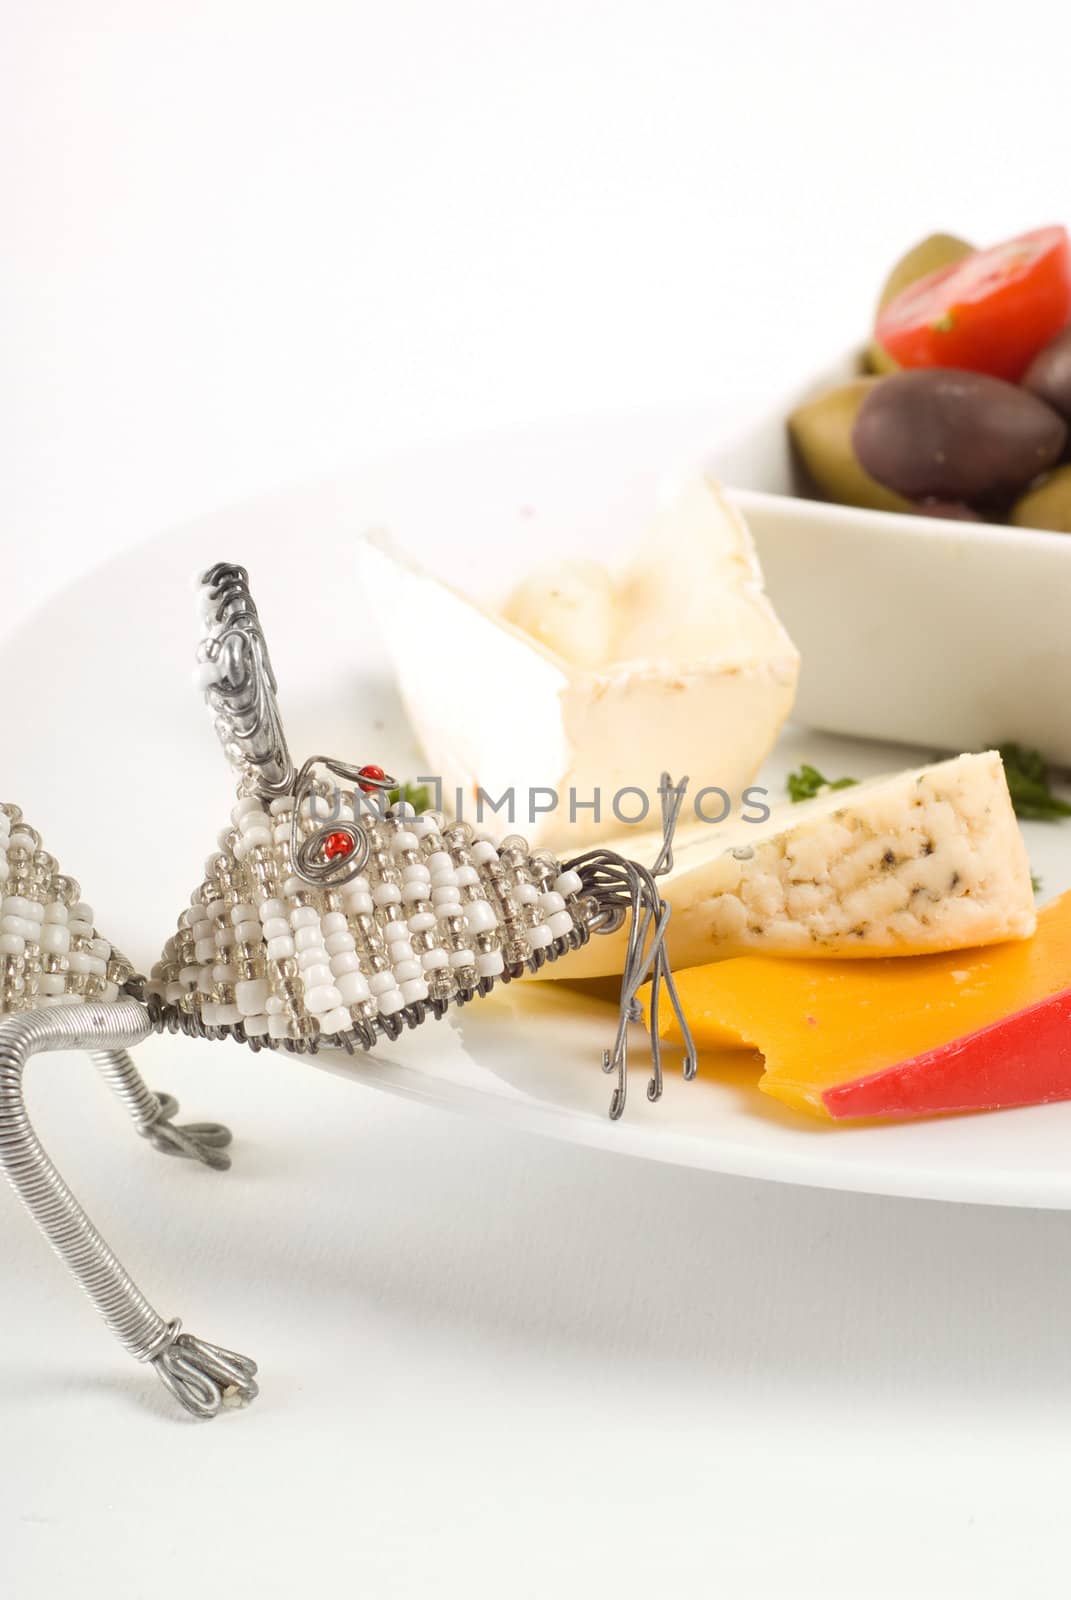 Fun wire mouse eating cheese platter